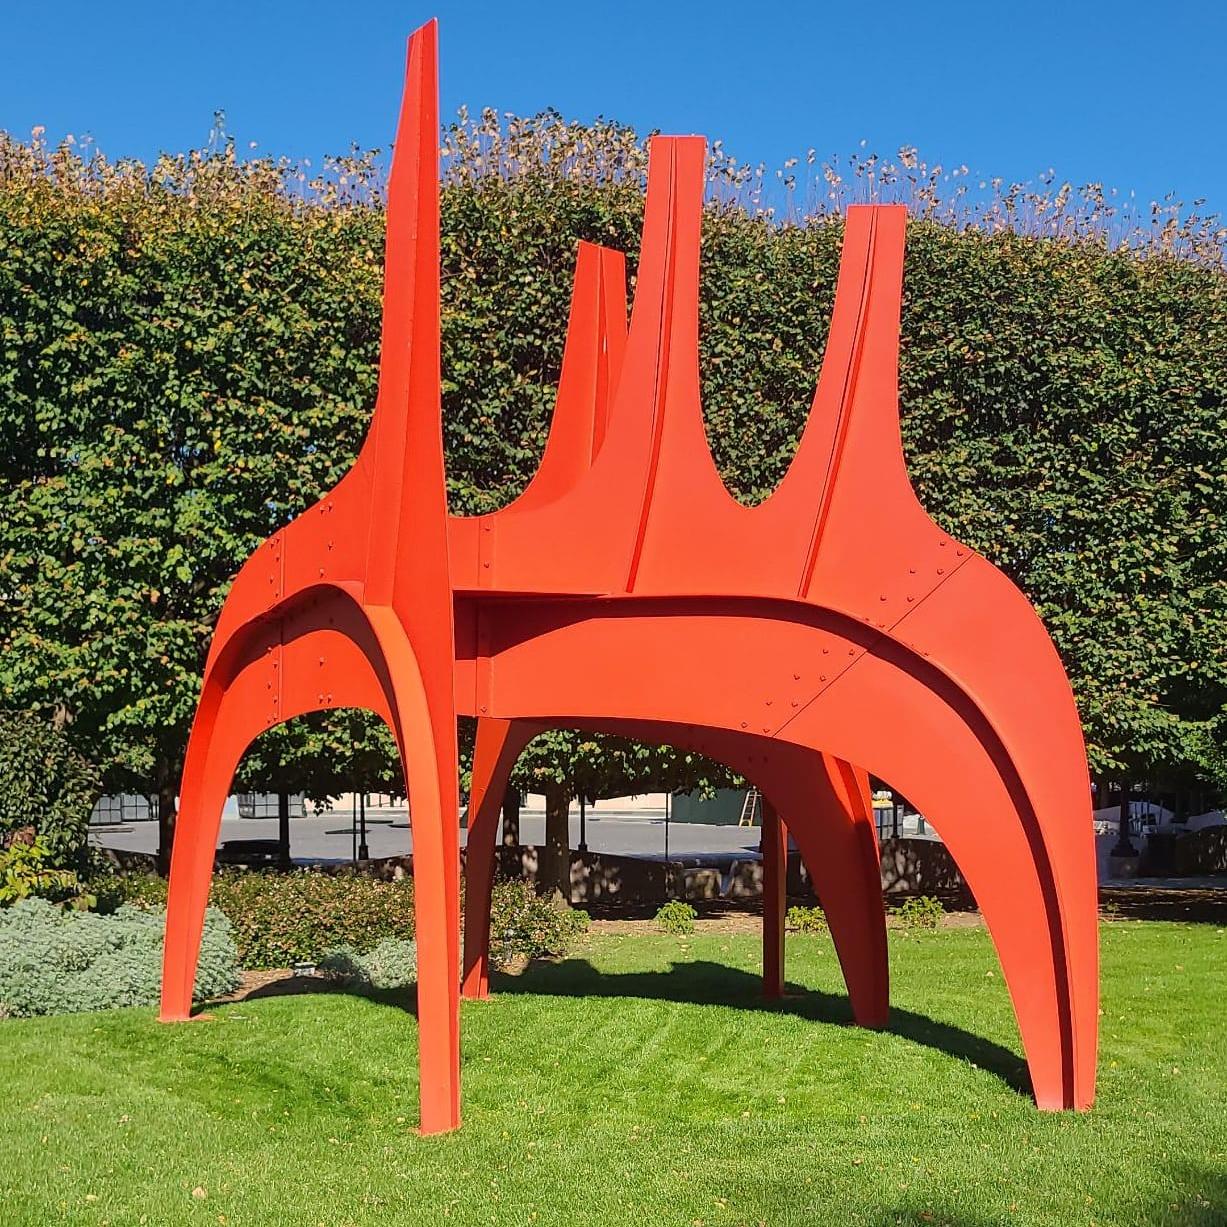 Why Should You Visit the National Gallery of Art Sculpture Garden?